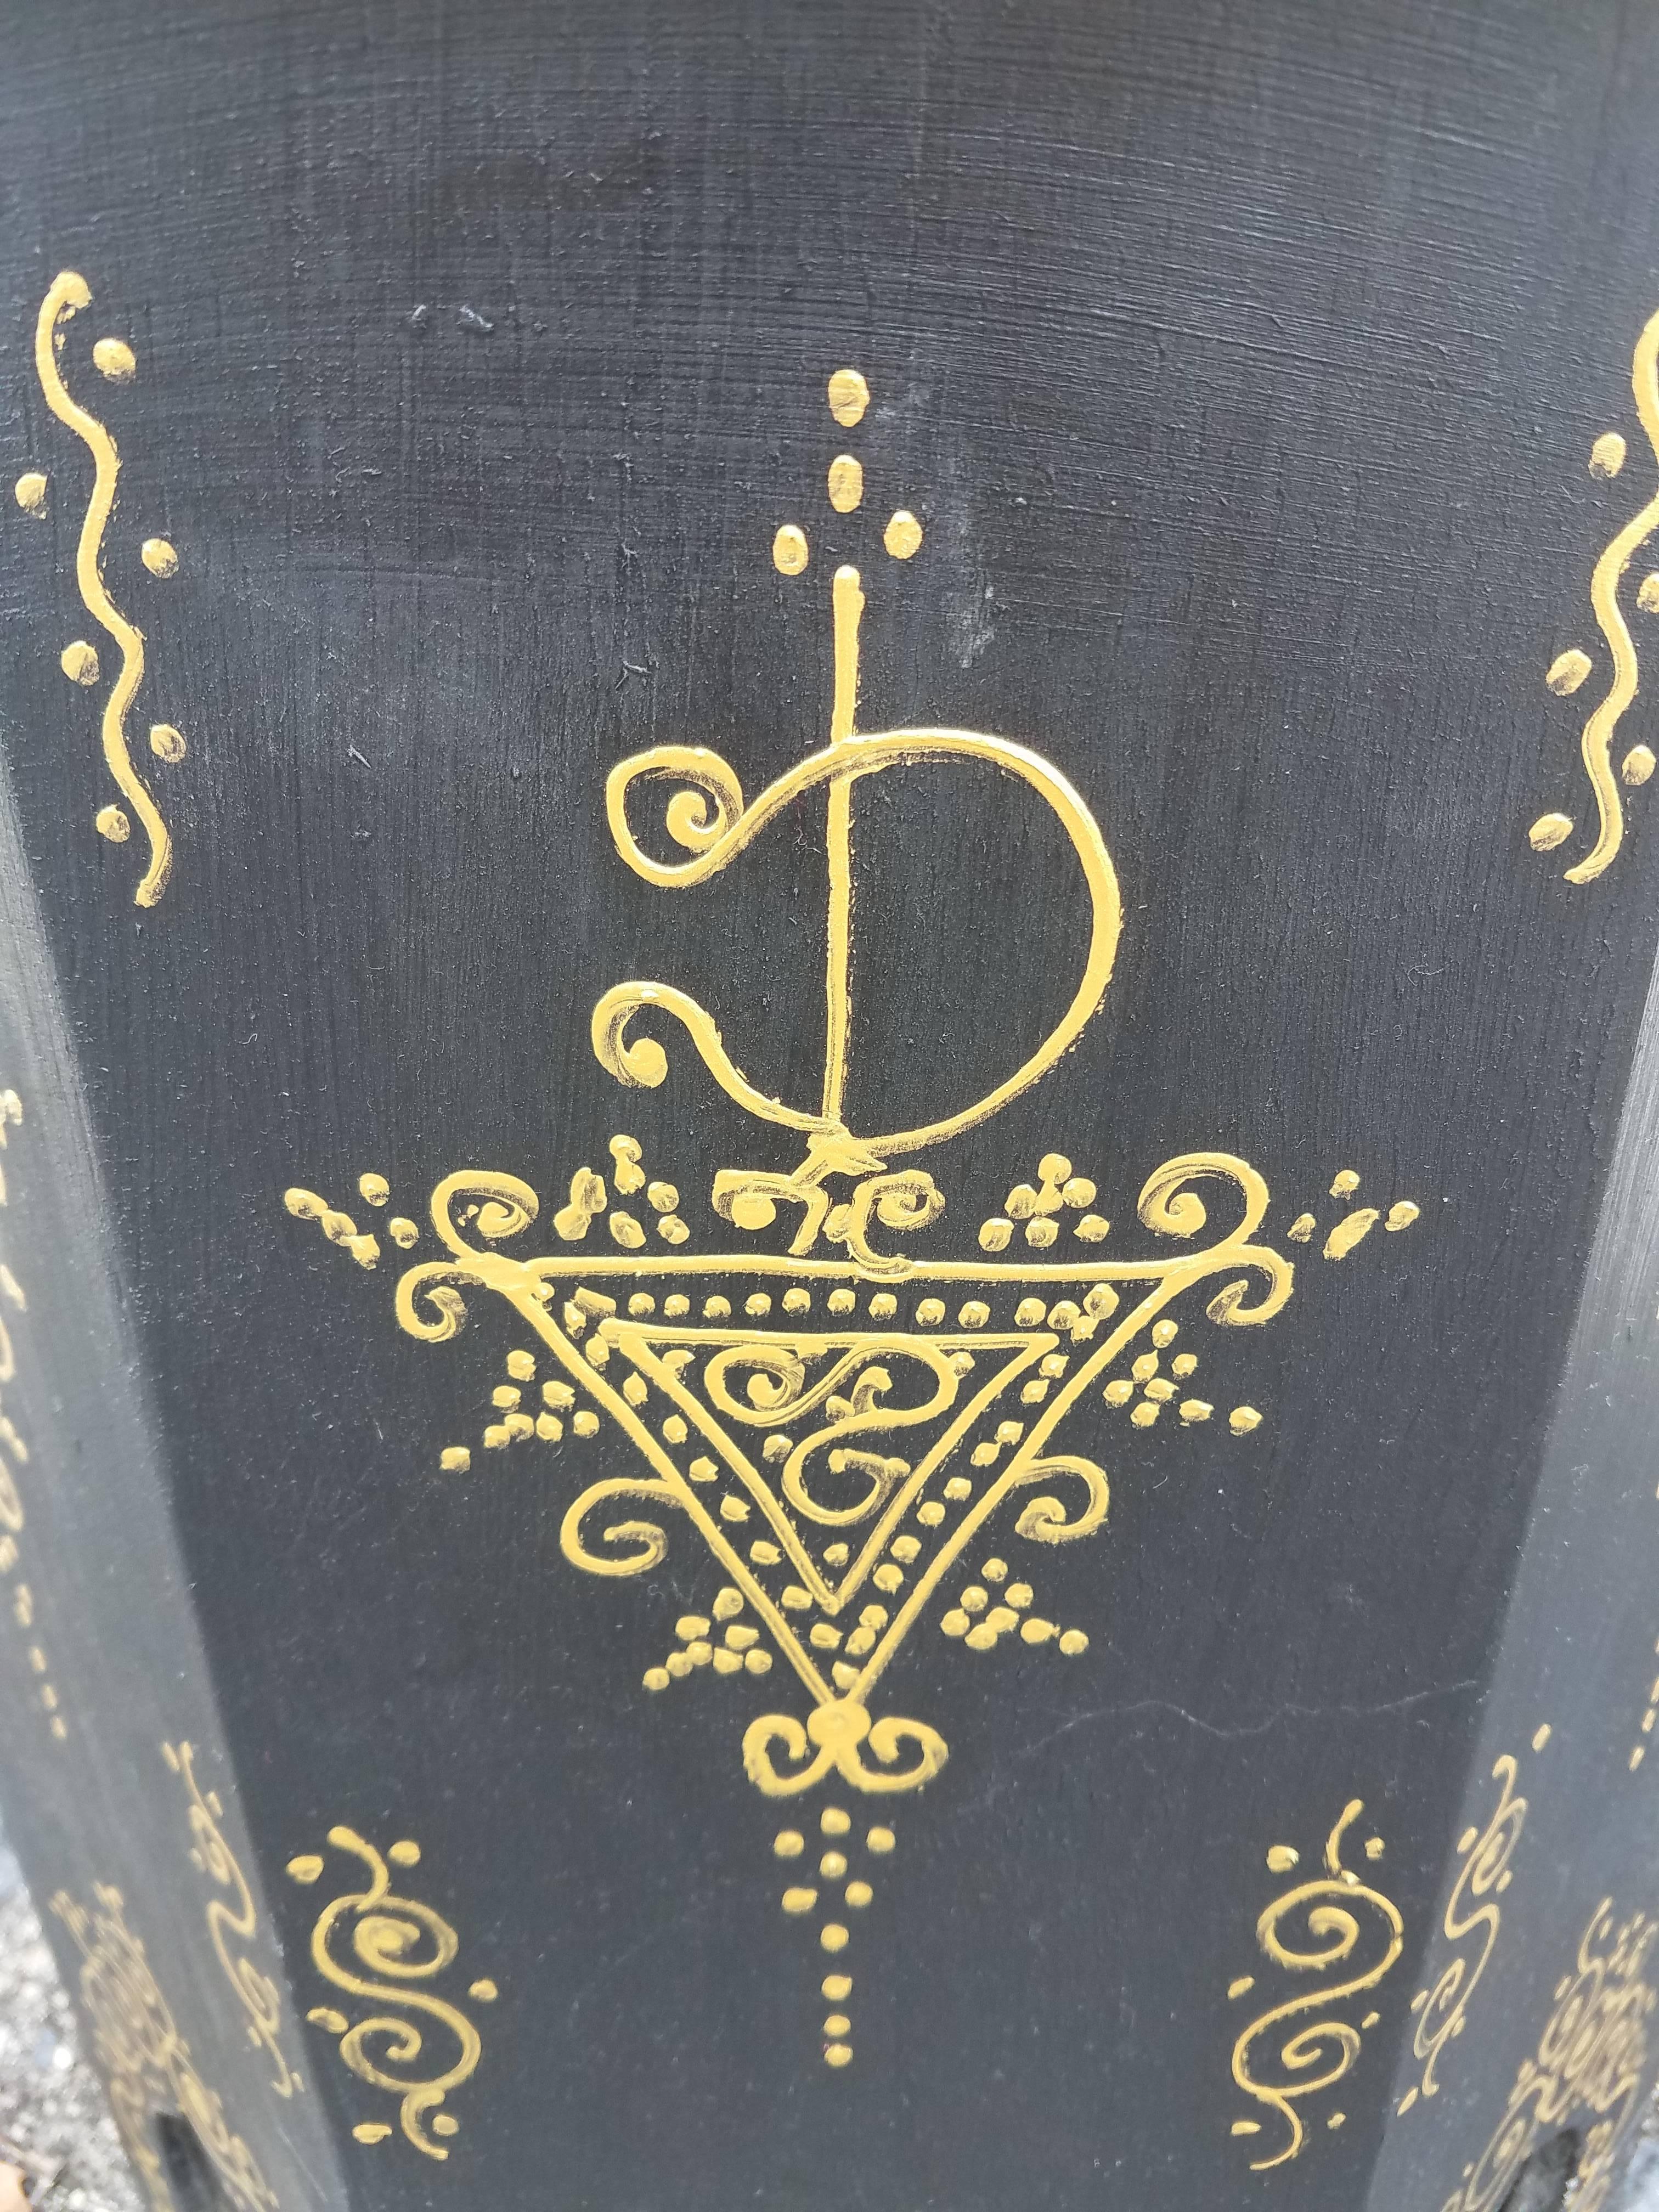 Rare find! 100% hand-painted Moroccan hexagonal shape side table. Black base with gold color design. Great handcraftsmanship throughout. Beautiful add-on to your decor. This table measures approximately 20